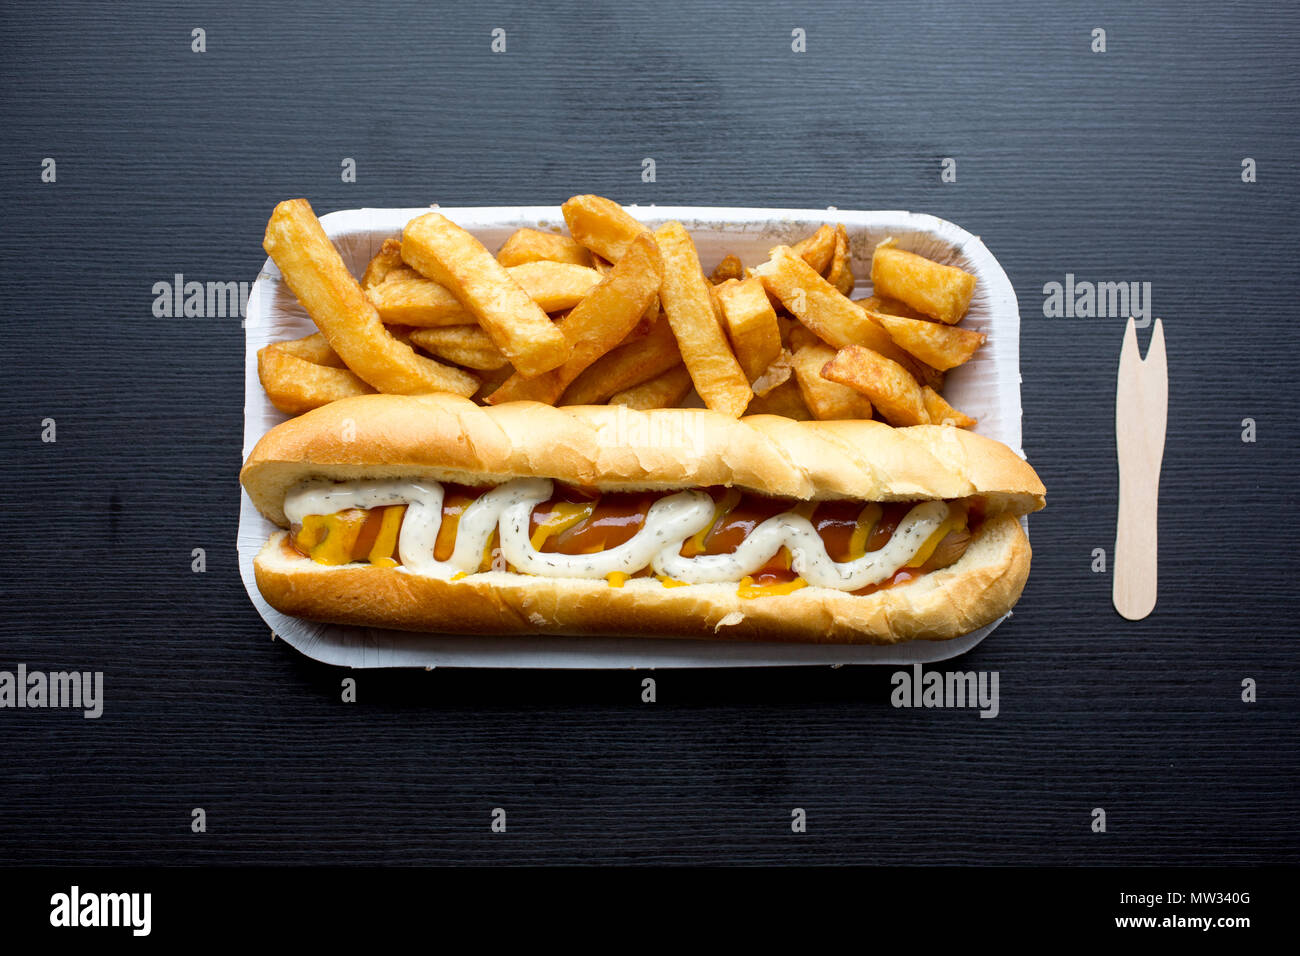 Hot dog and chips Stock Photo